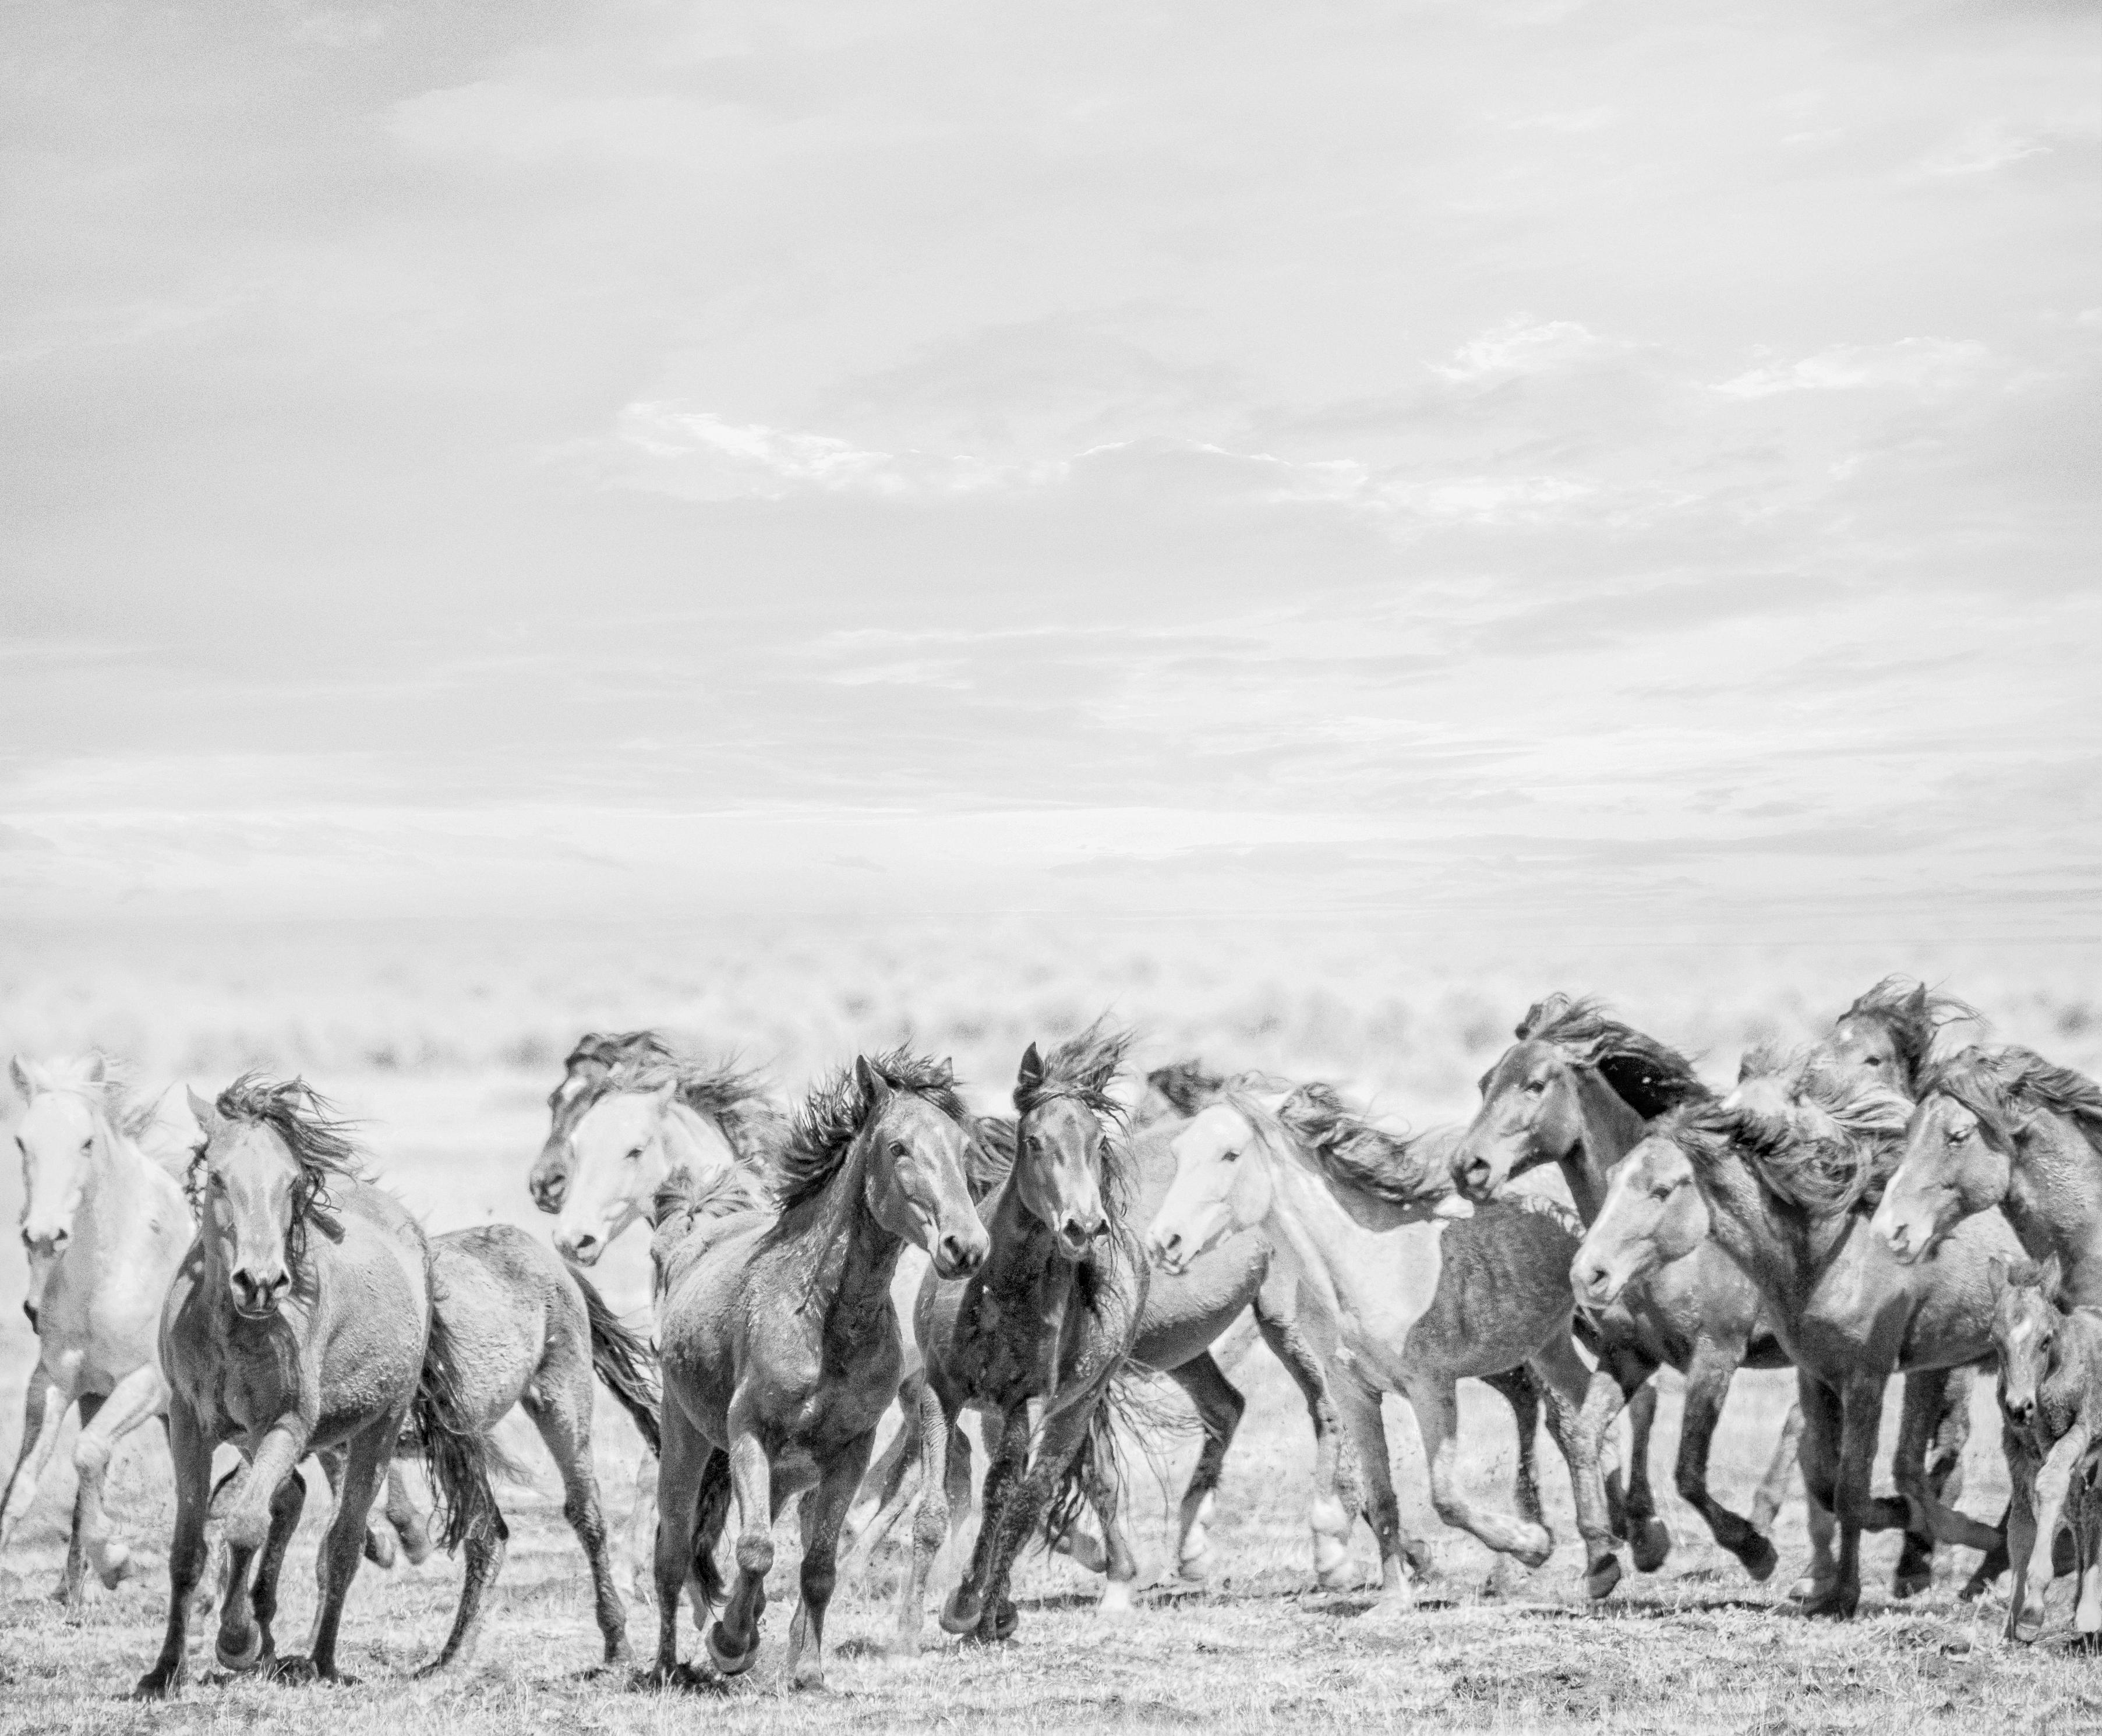 Shane Russeck Animal Print - "Go West"  36x48 - B&W Photography of Wild Horses - (Special 1stdibs Price)